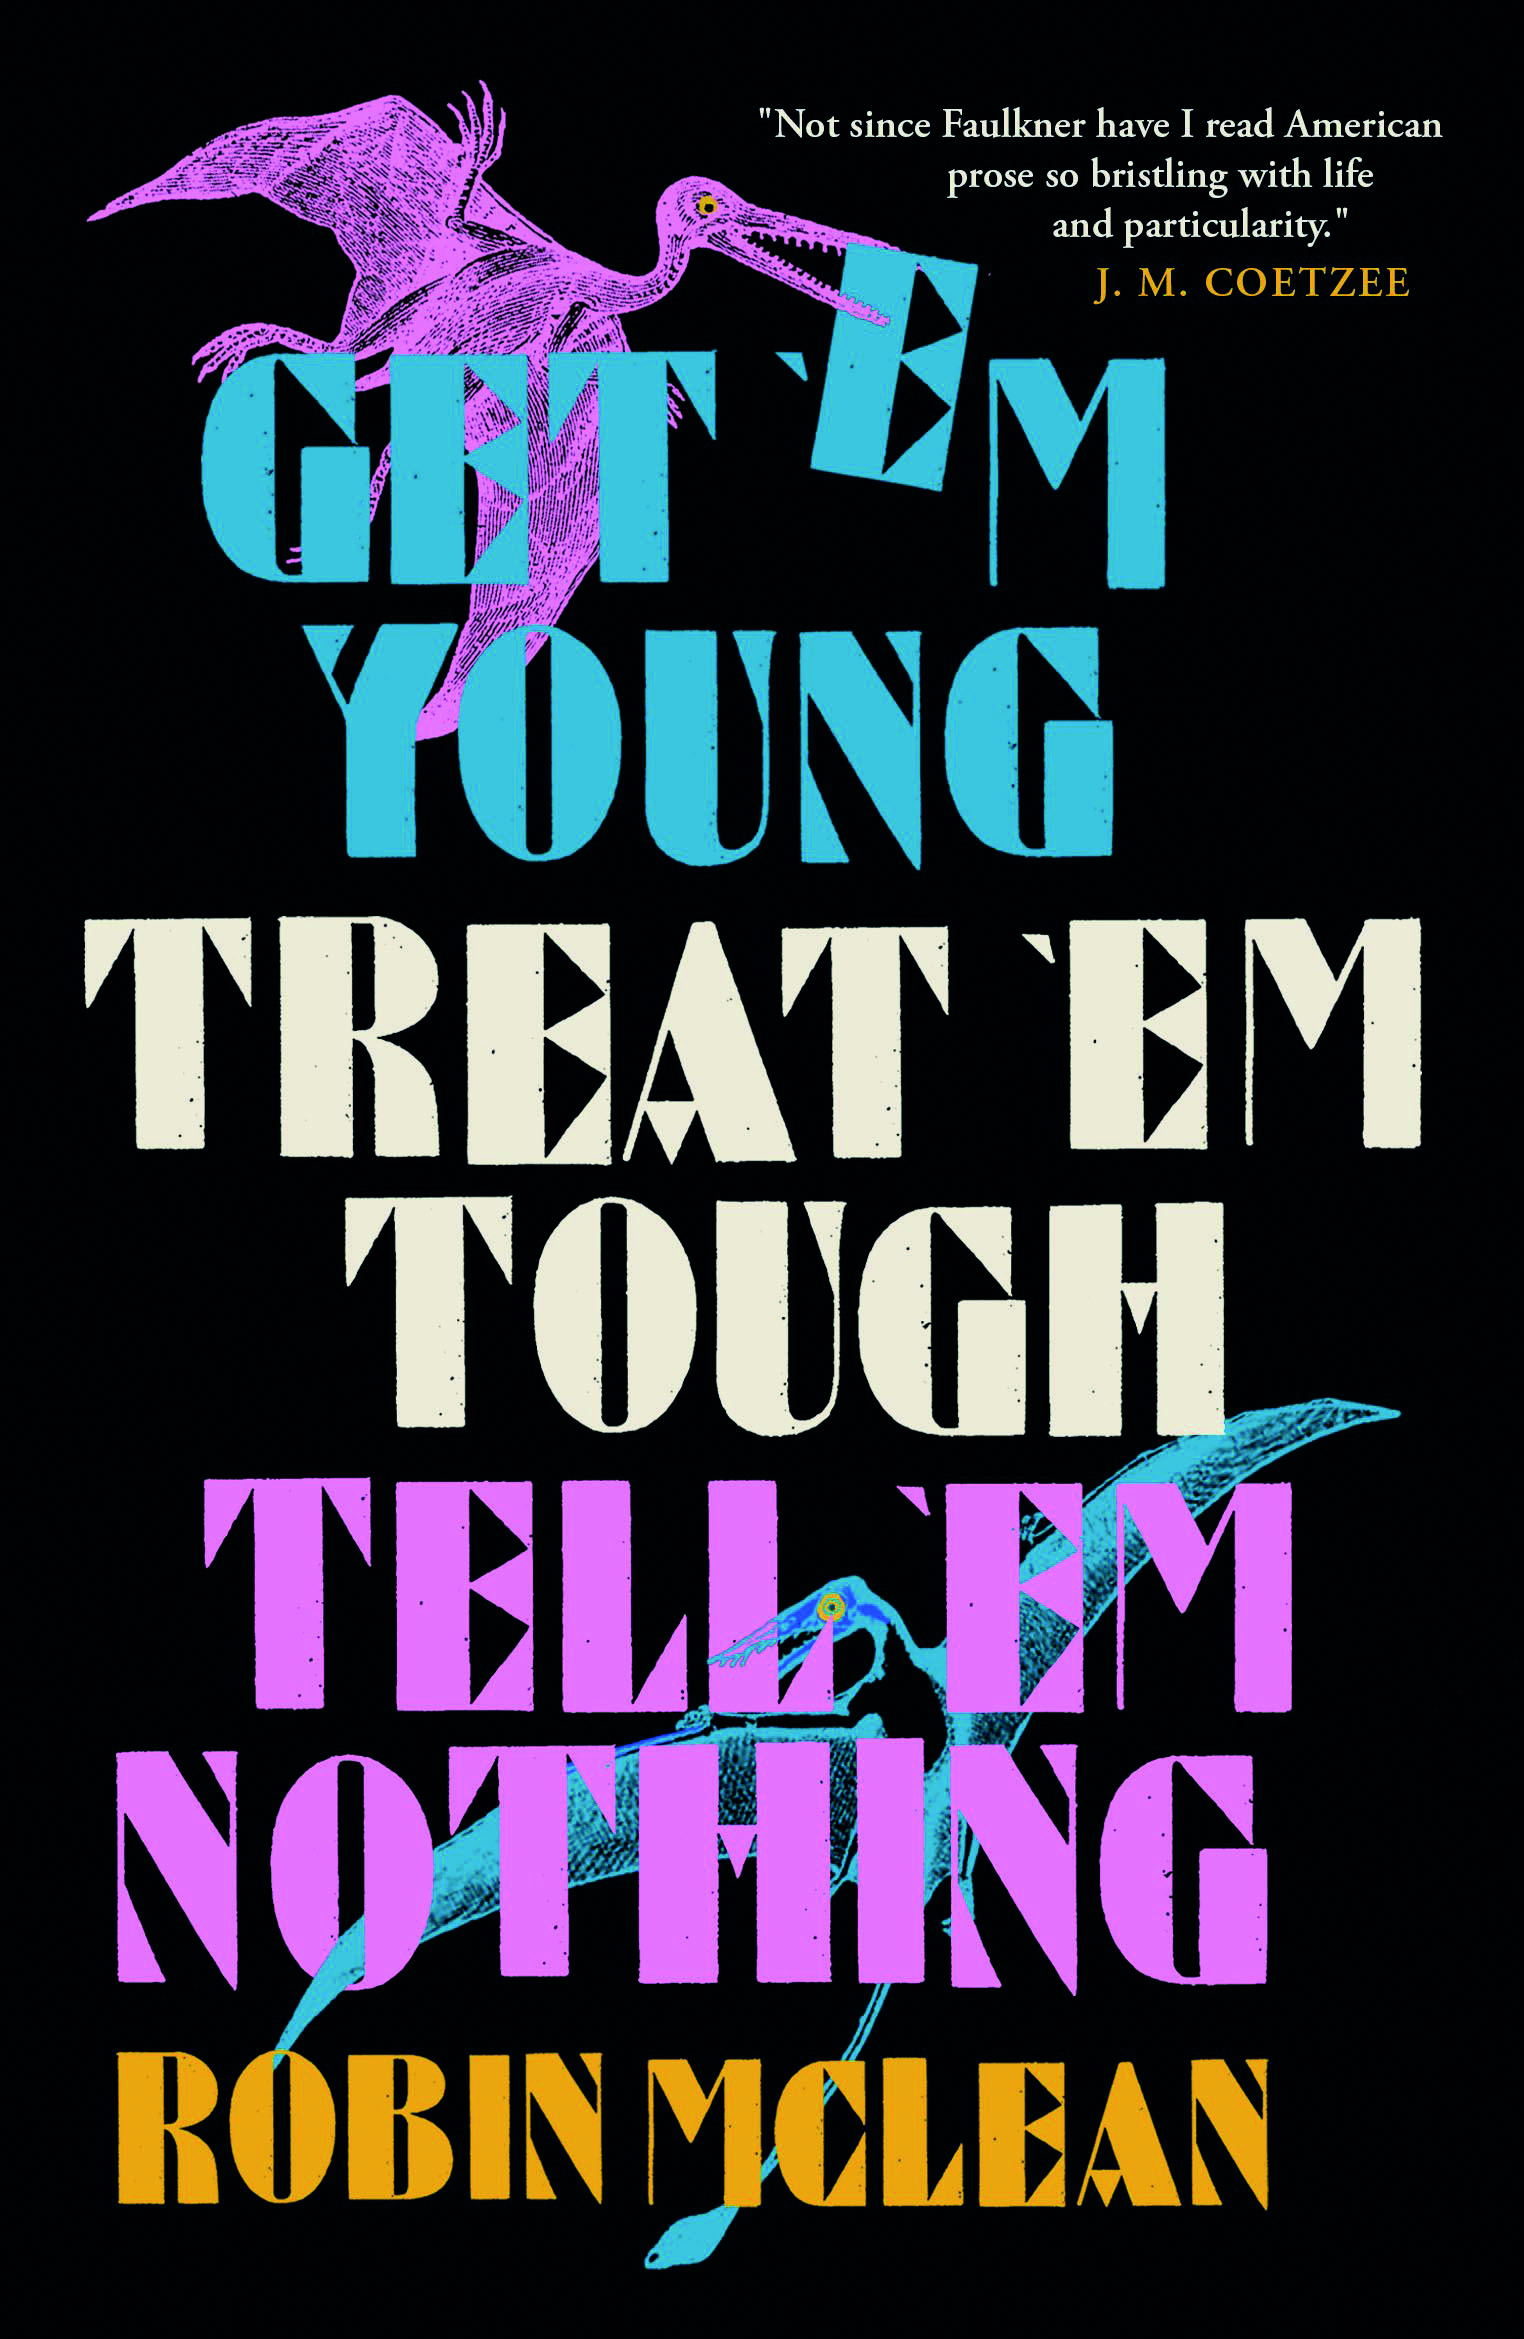 The Big Issue's must read books: Get Em Young, Treat Em Tough, Tell Em Nothing